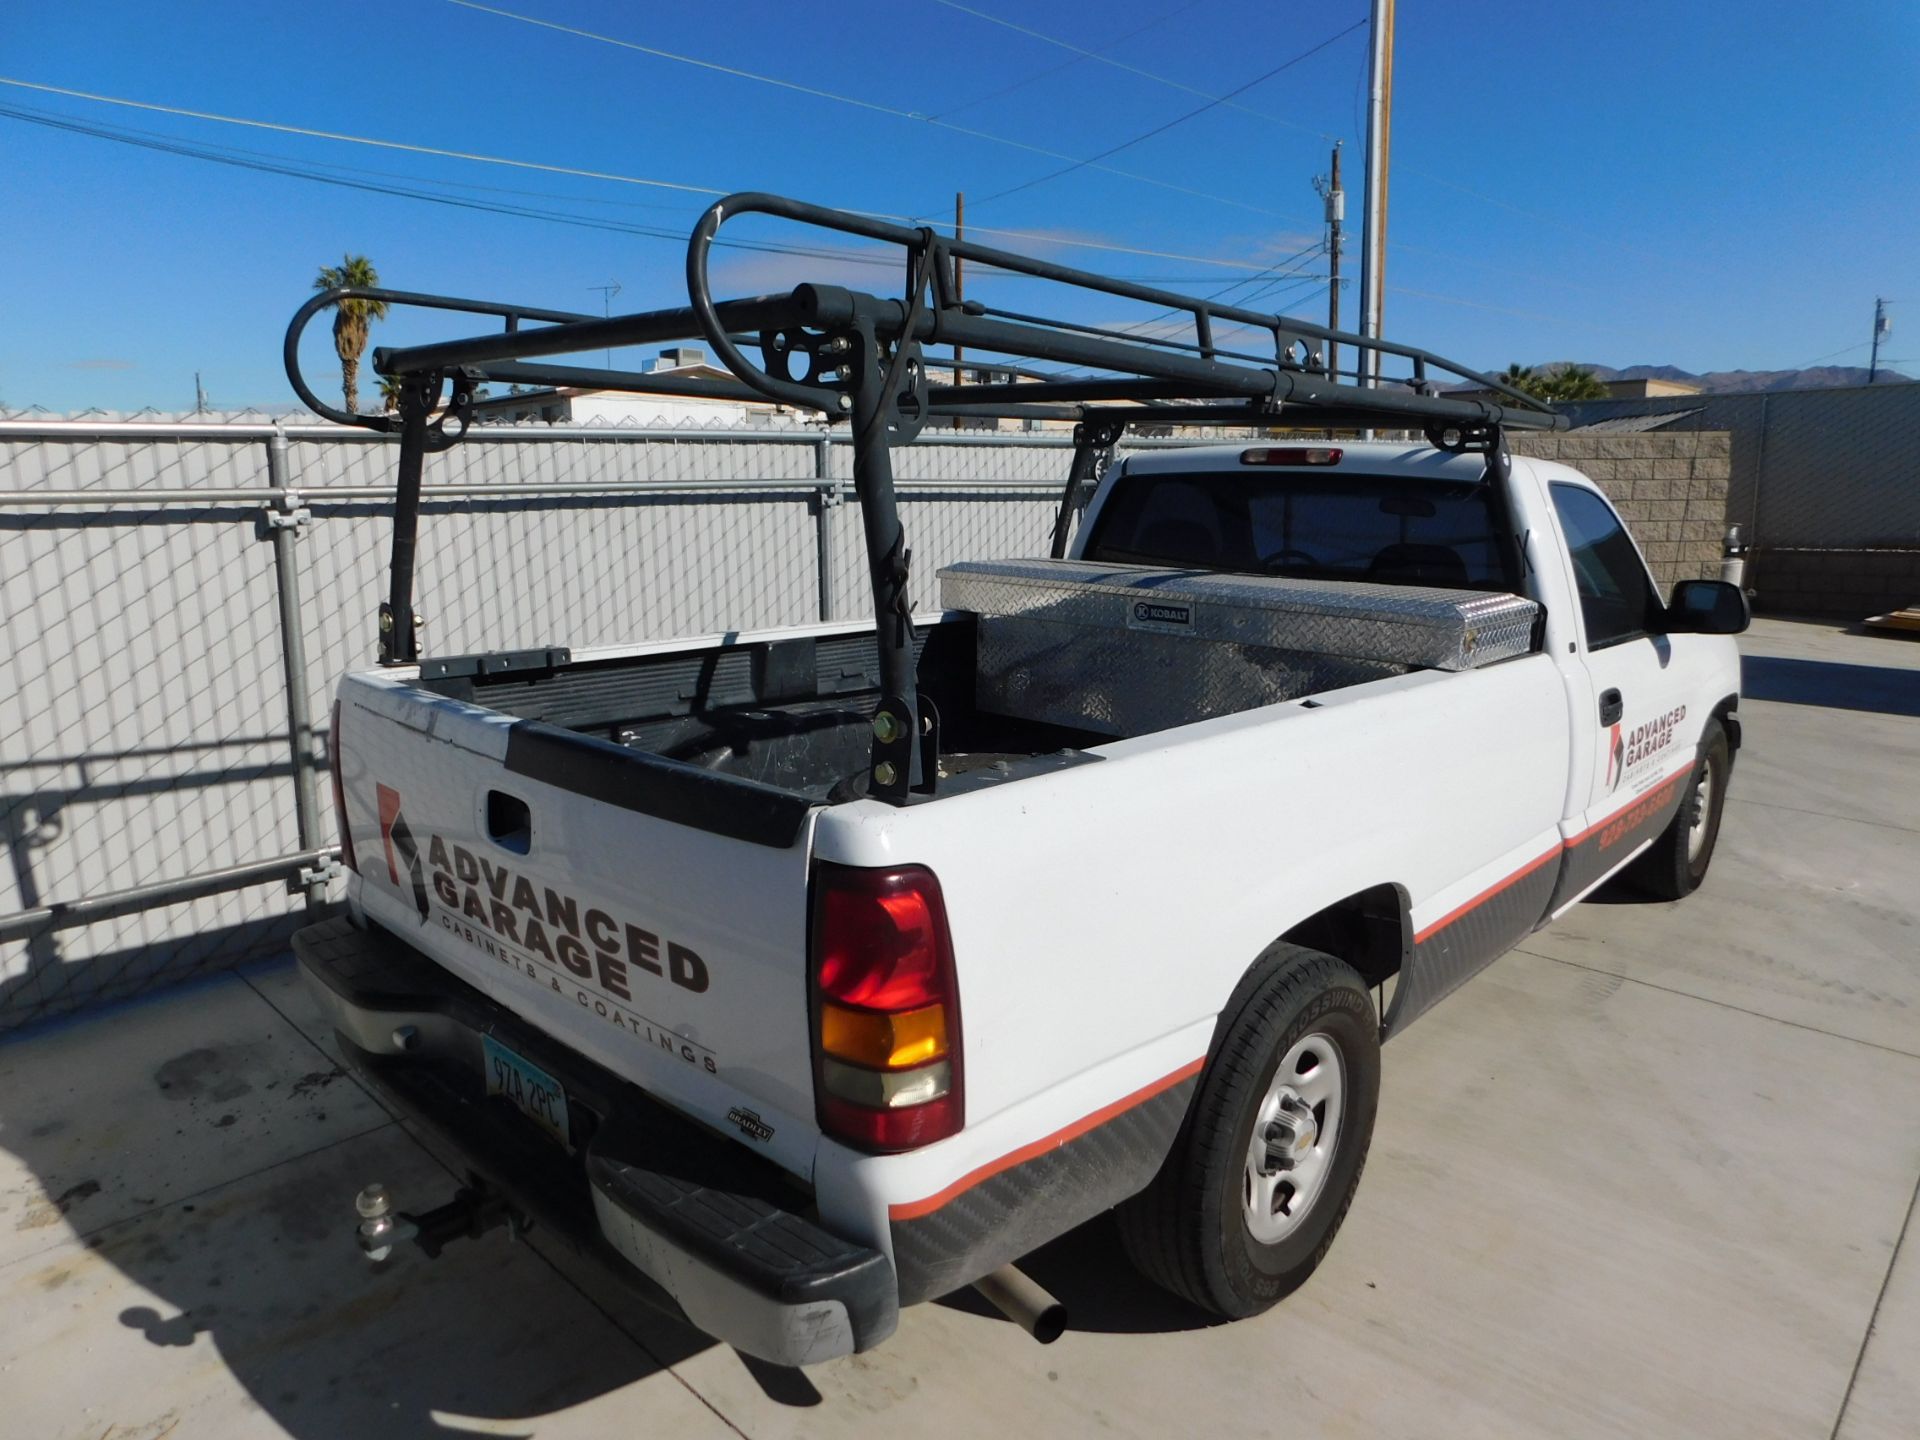 Silverado Pickup with Tool Rack and Tool Box, 88,834 Miles Showing, VIN 1GCEC14T91E251093, - Image 6 of 7